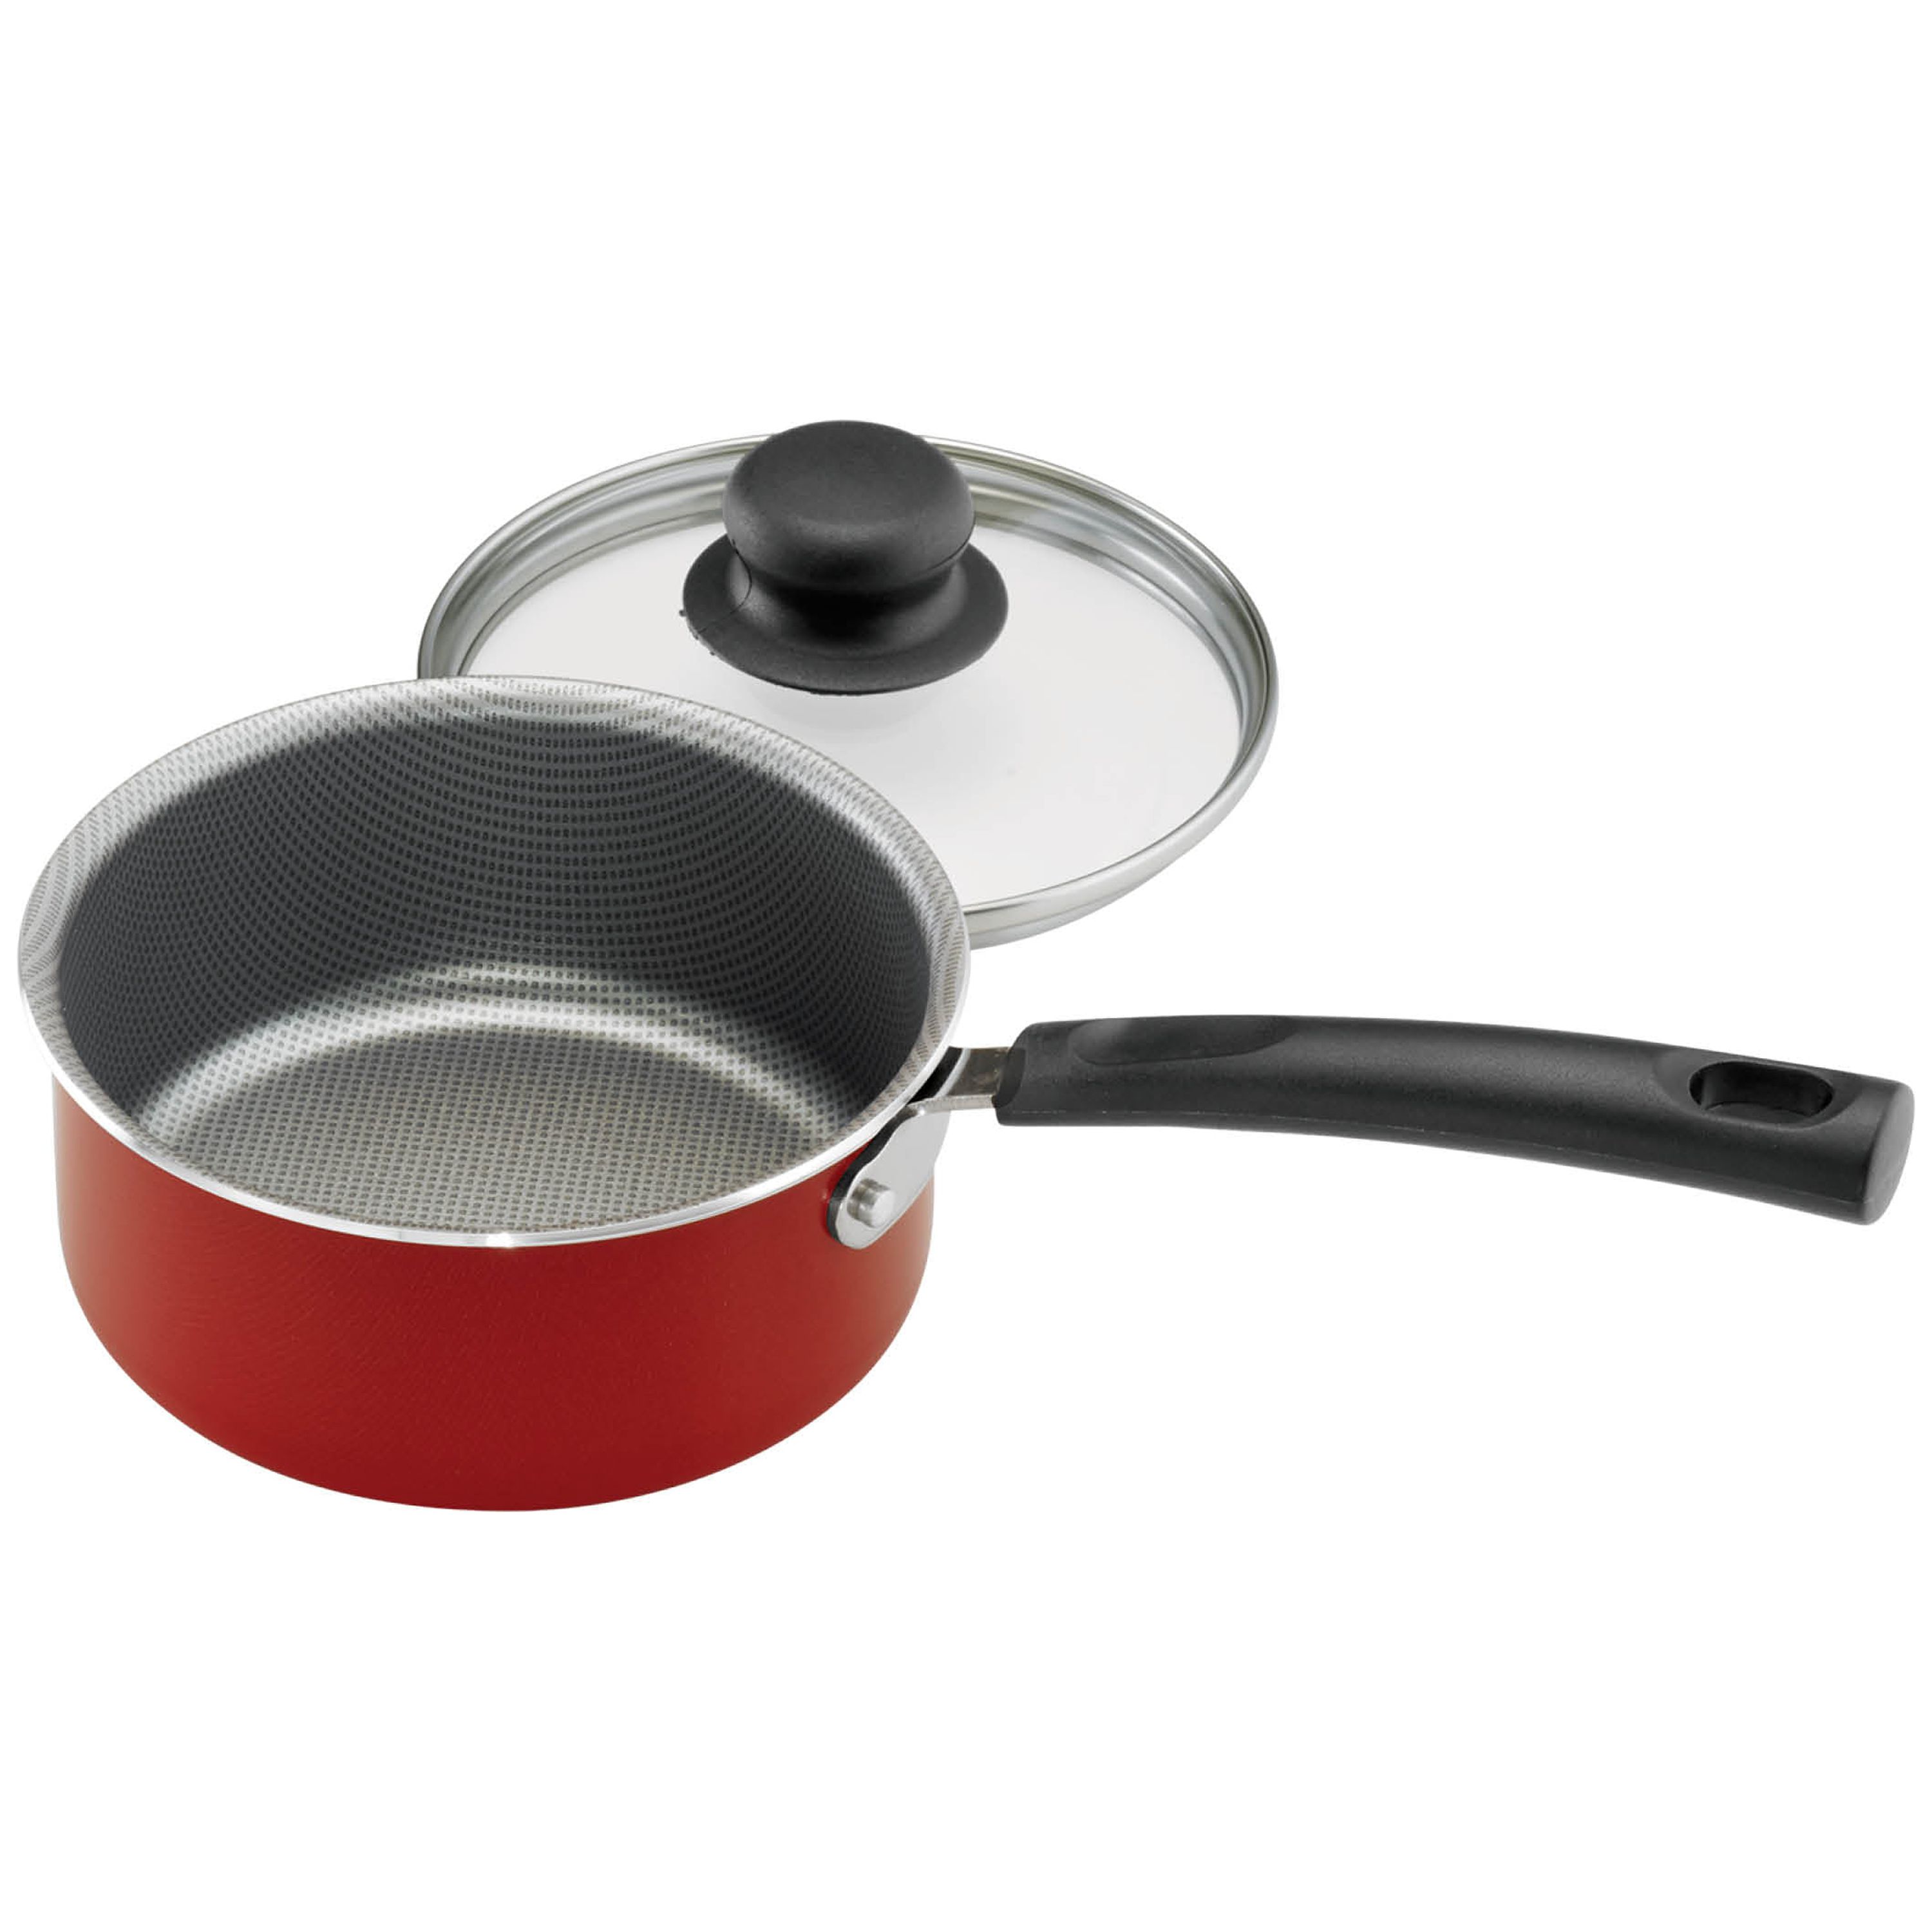 Tramontina Primaware 18 Piece Non-stick Cookware Set, Red - image 21 of 26